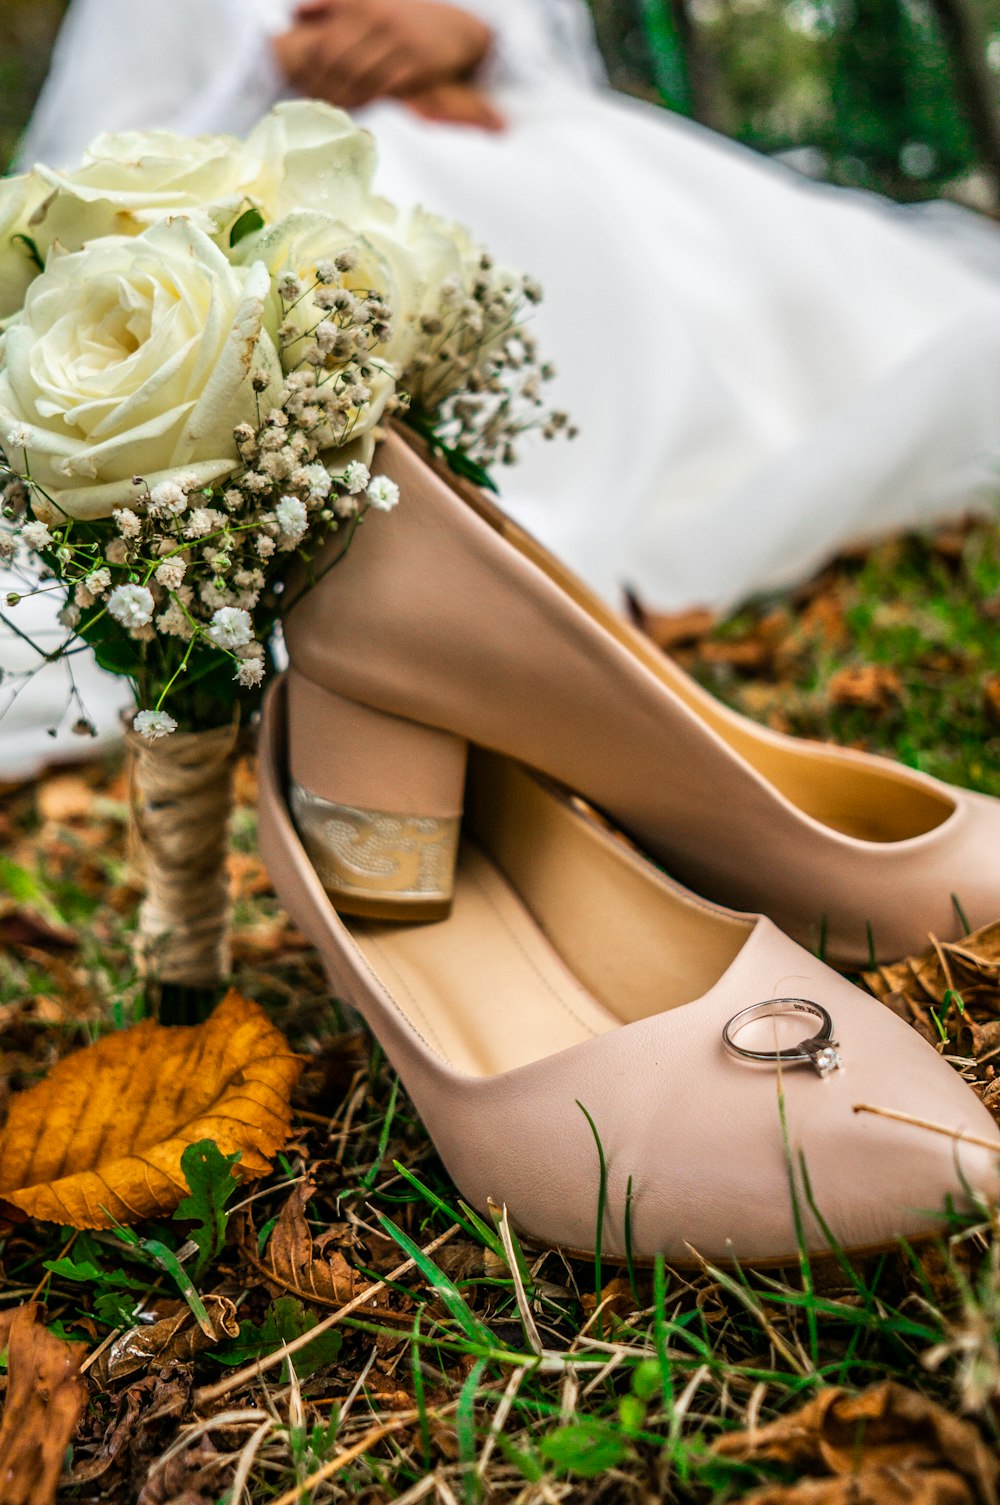 gold solitaire ring placed on top brown leather shoe on grass